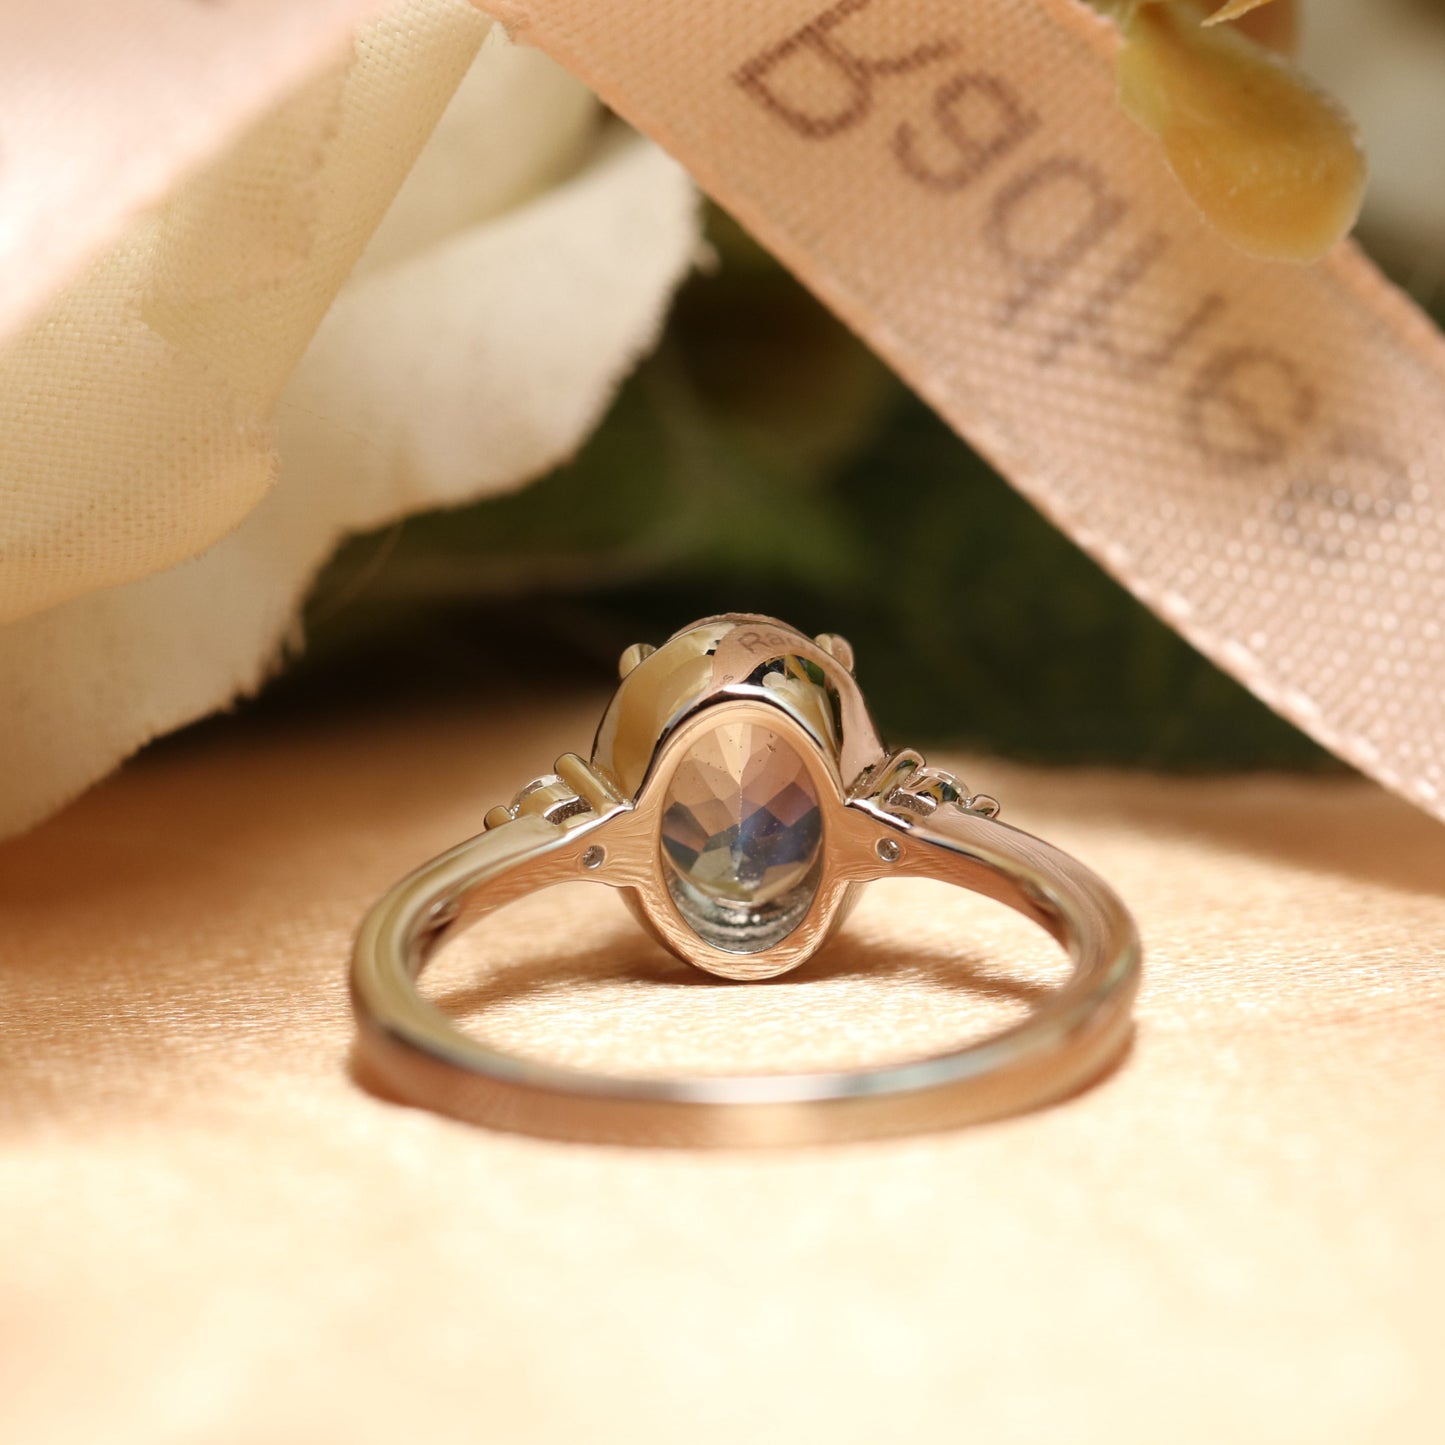 Trilogy Past Present and Future, 1.1 carat Oval cut rainbow Moonstone Engagement Ring in White Gold